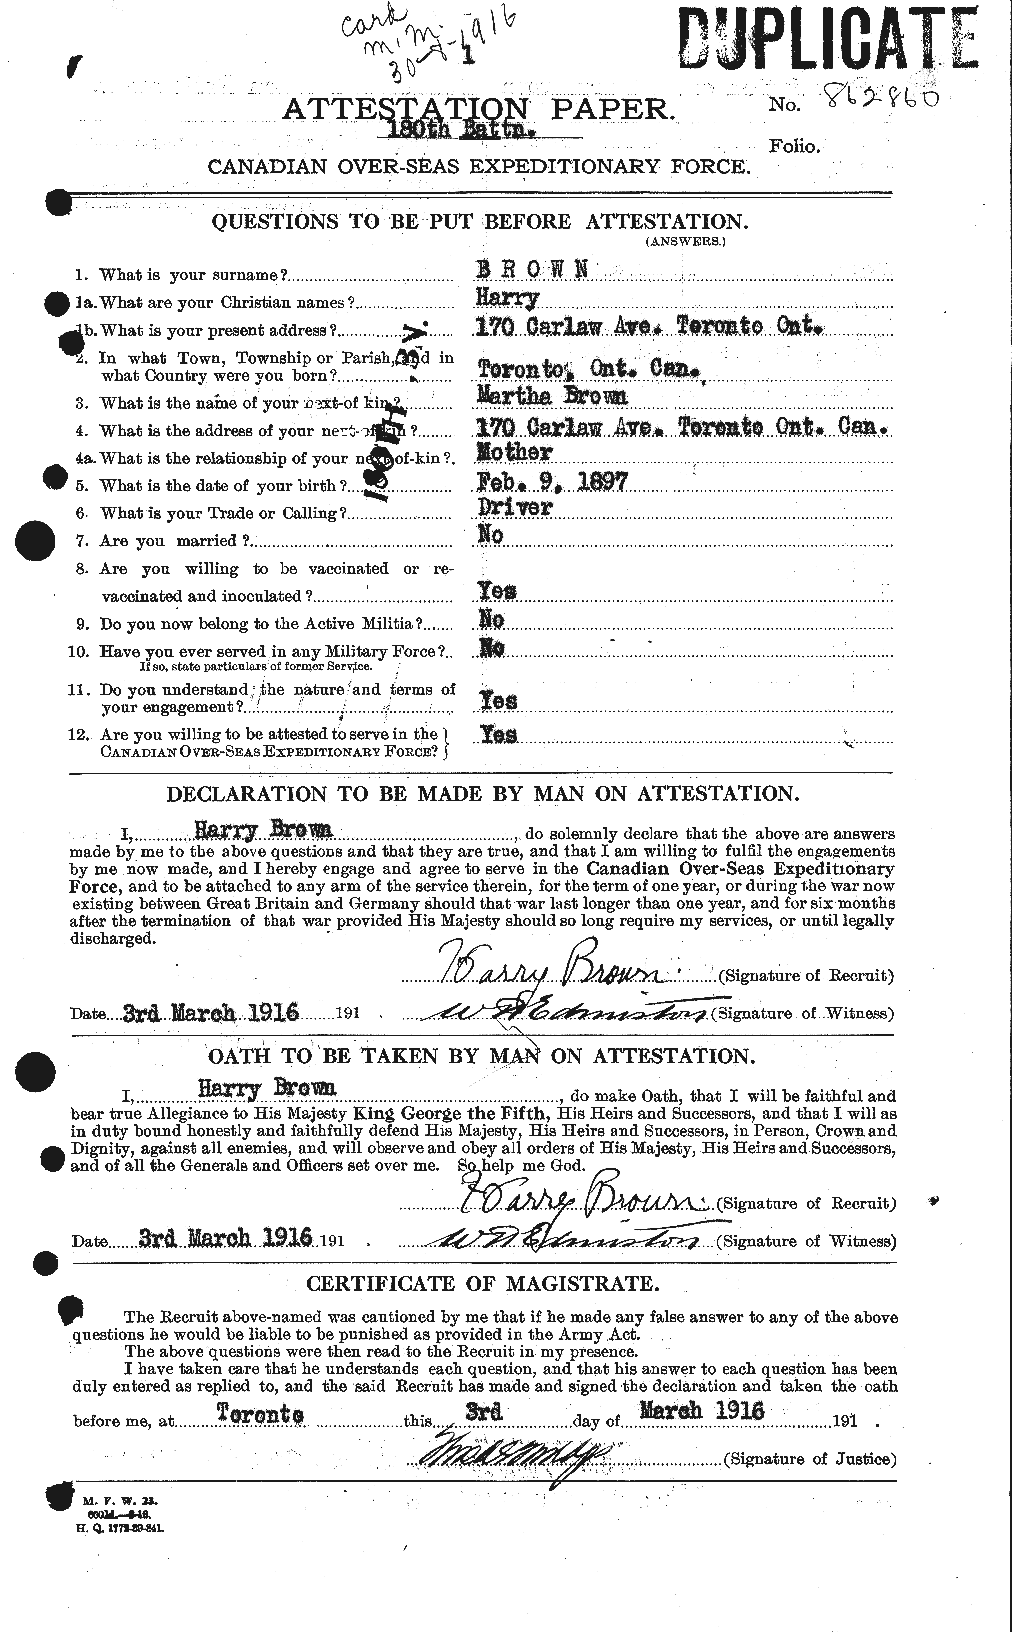 Personnel Records of the First World War - CEF 265386a